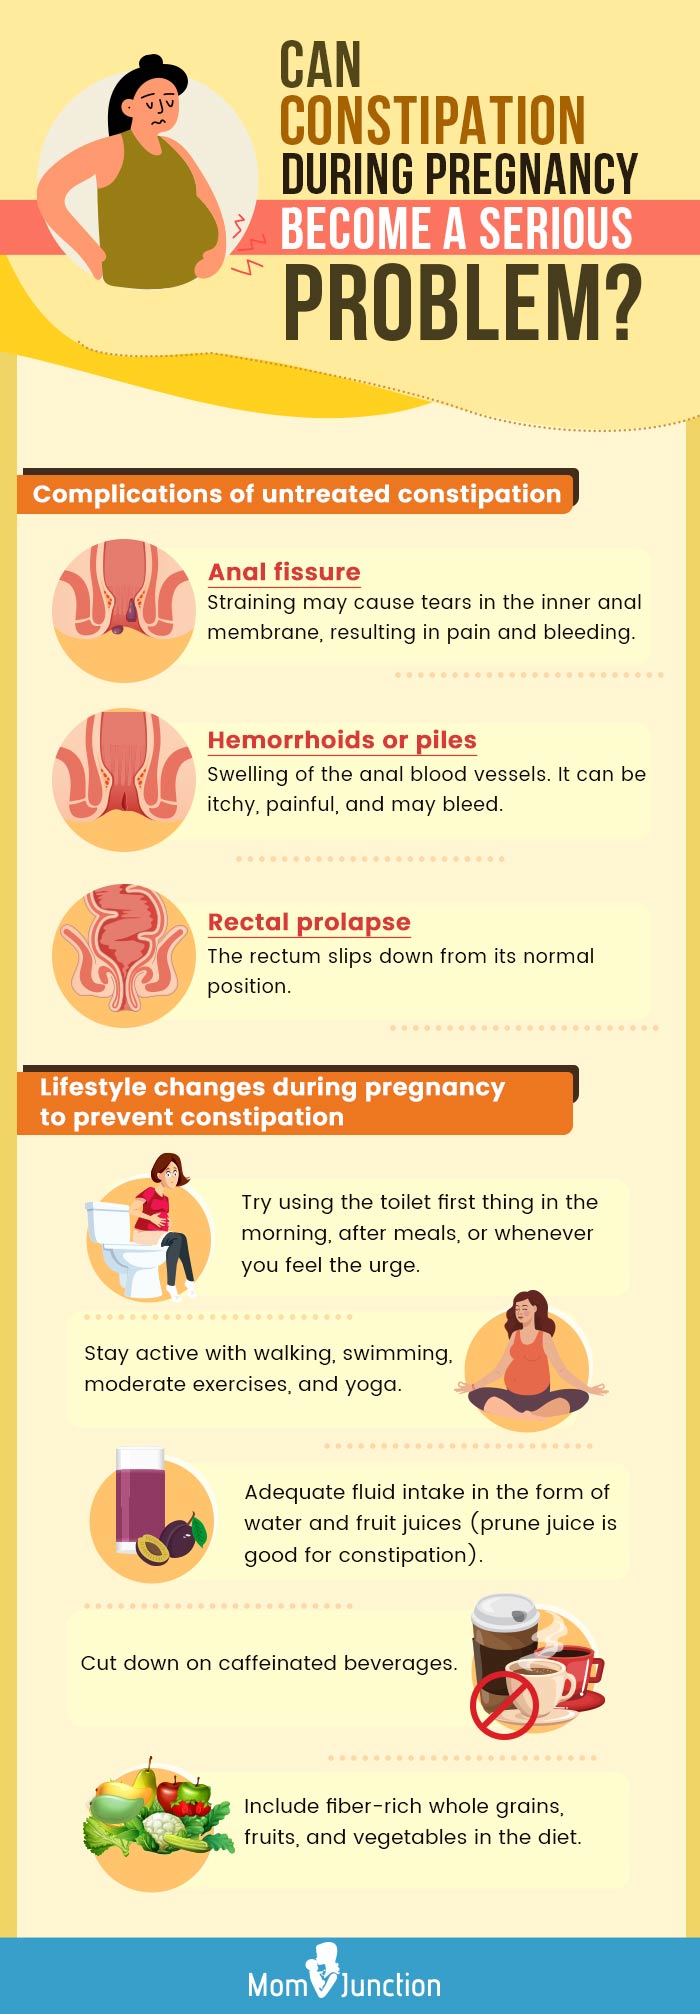 can constipation during pregnancy become a serious problem [infographic]